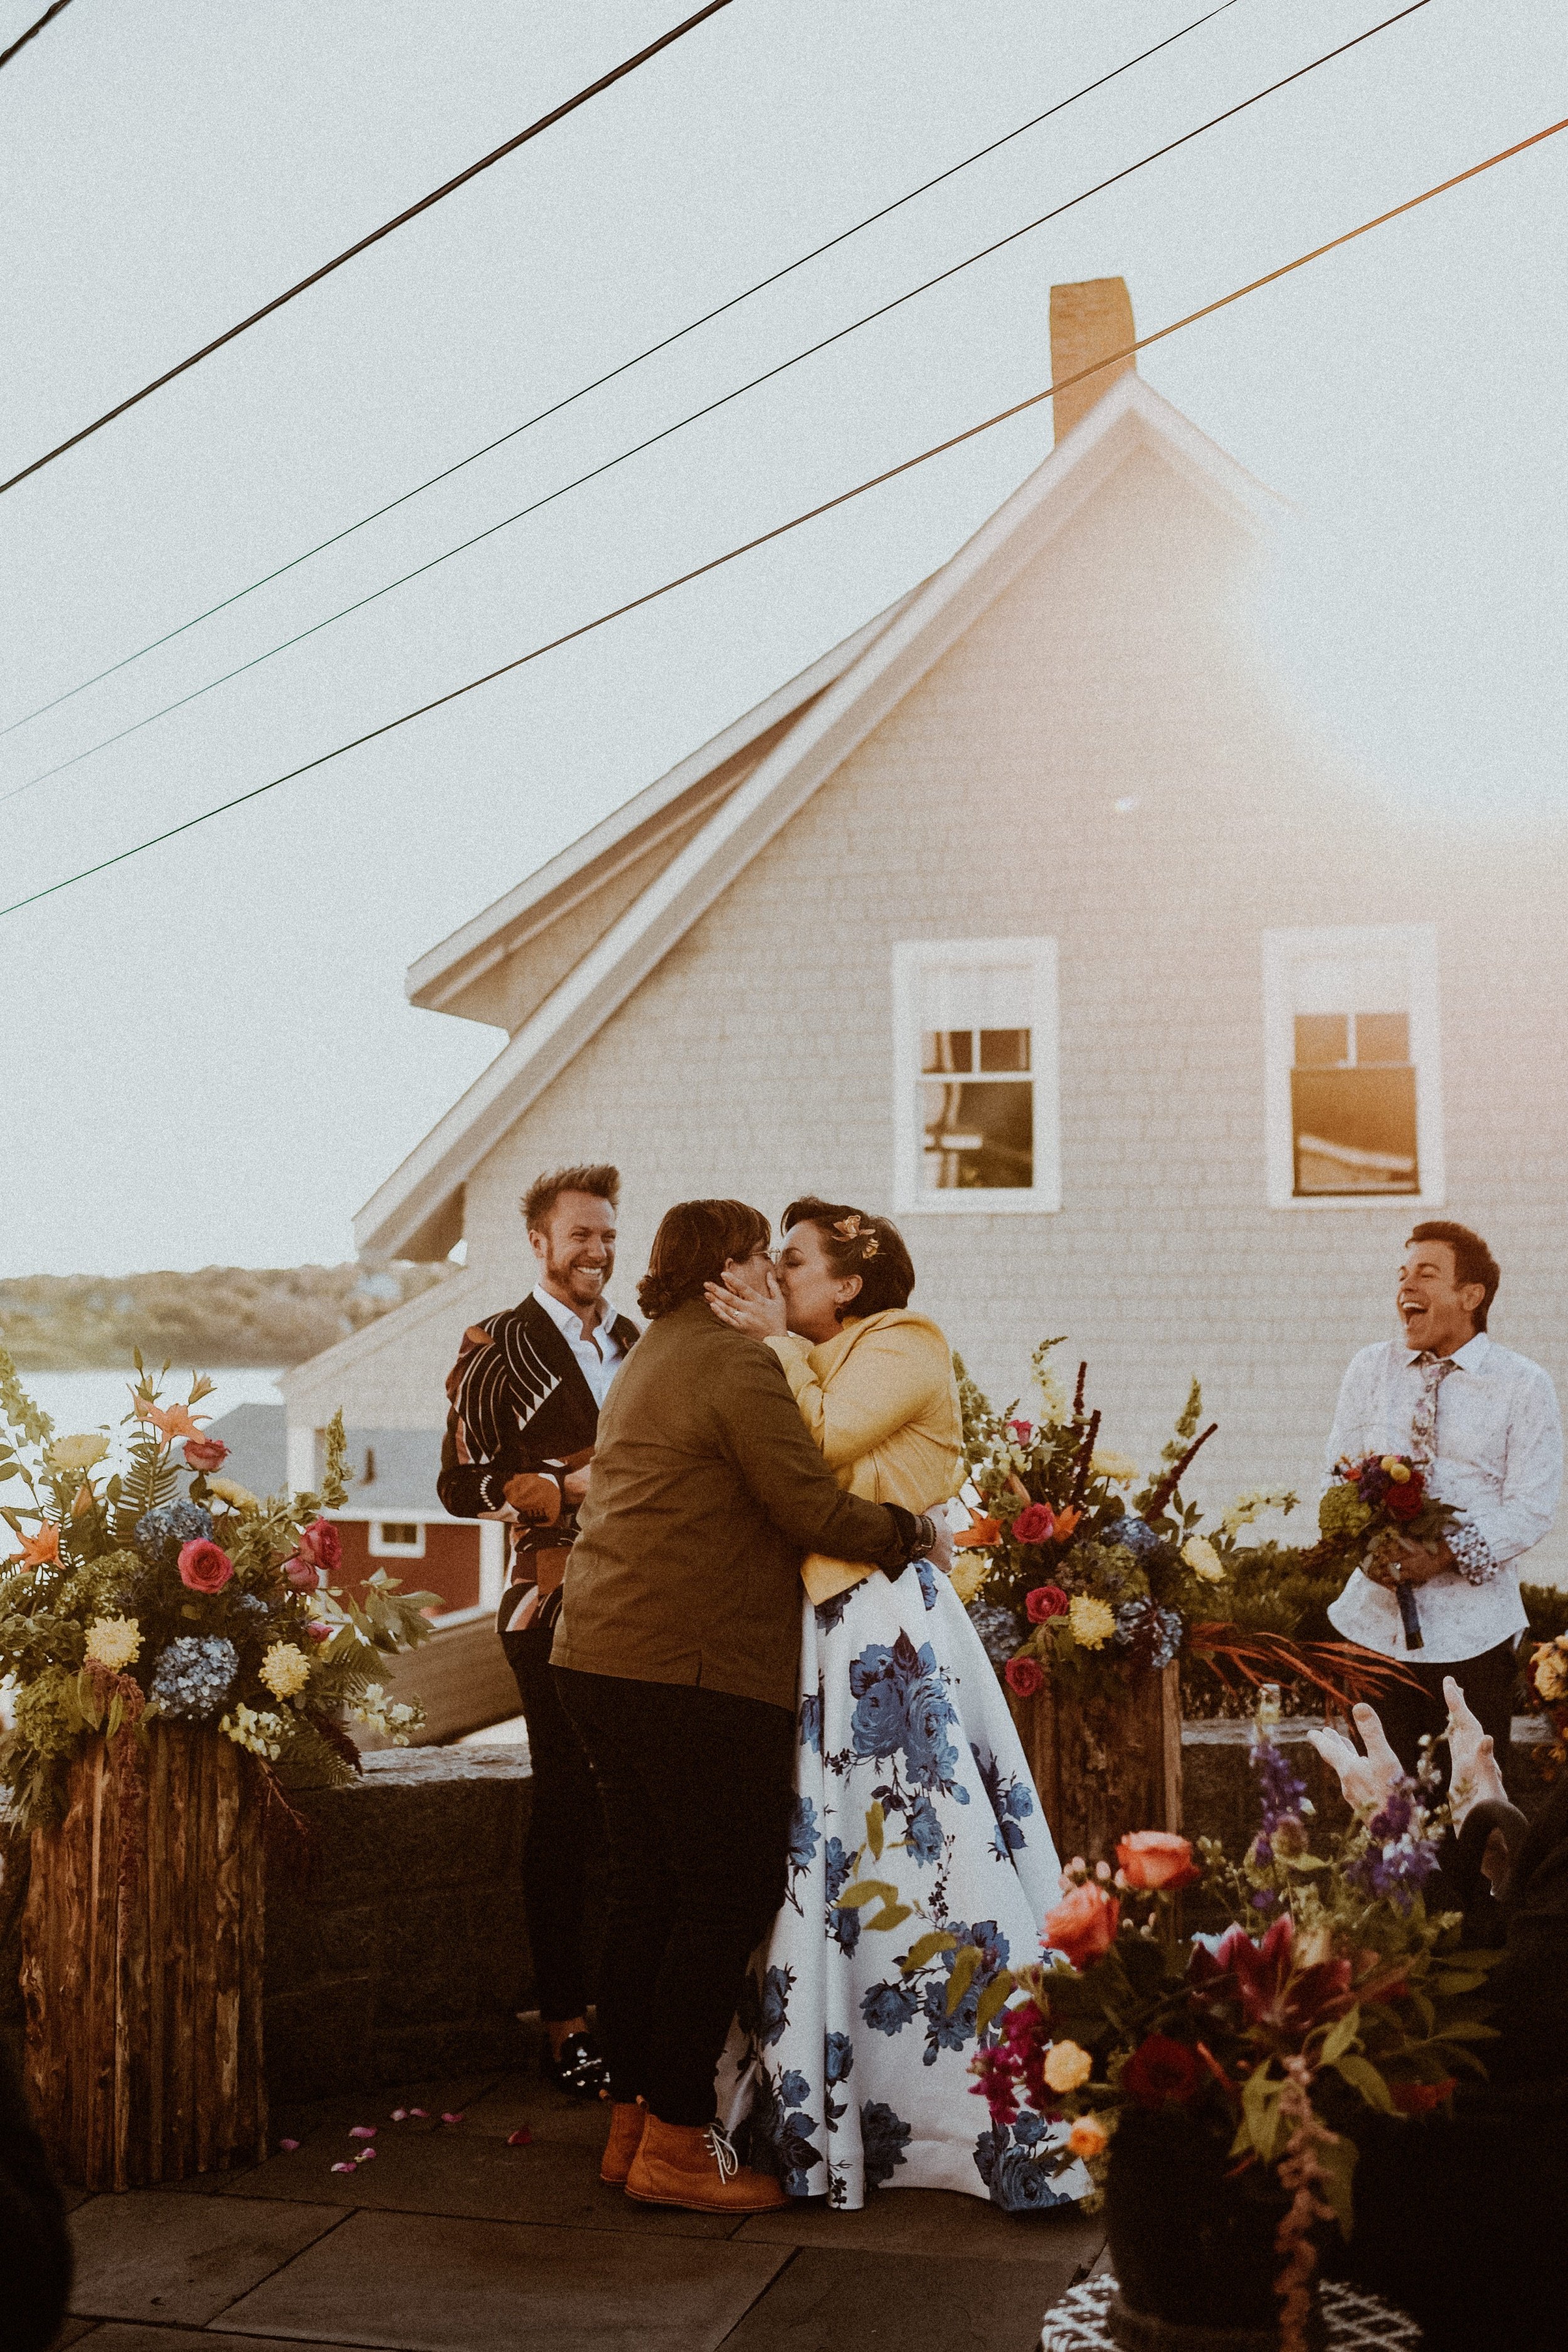 55_Colorful Intimate LGBTQ Wedding in Rockport MA - Vanessa Alves Photography.jpg